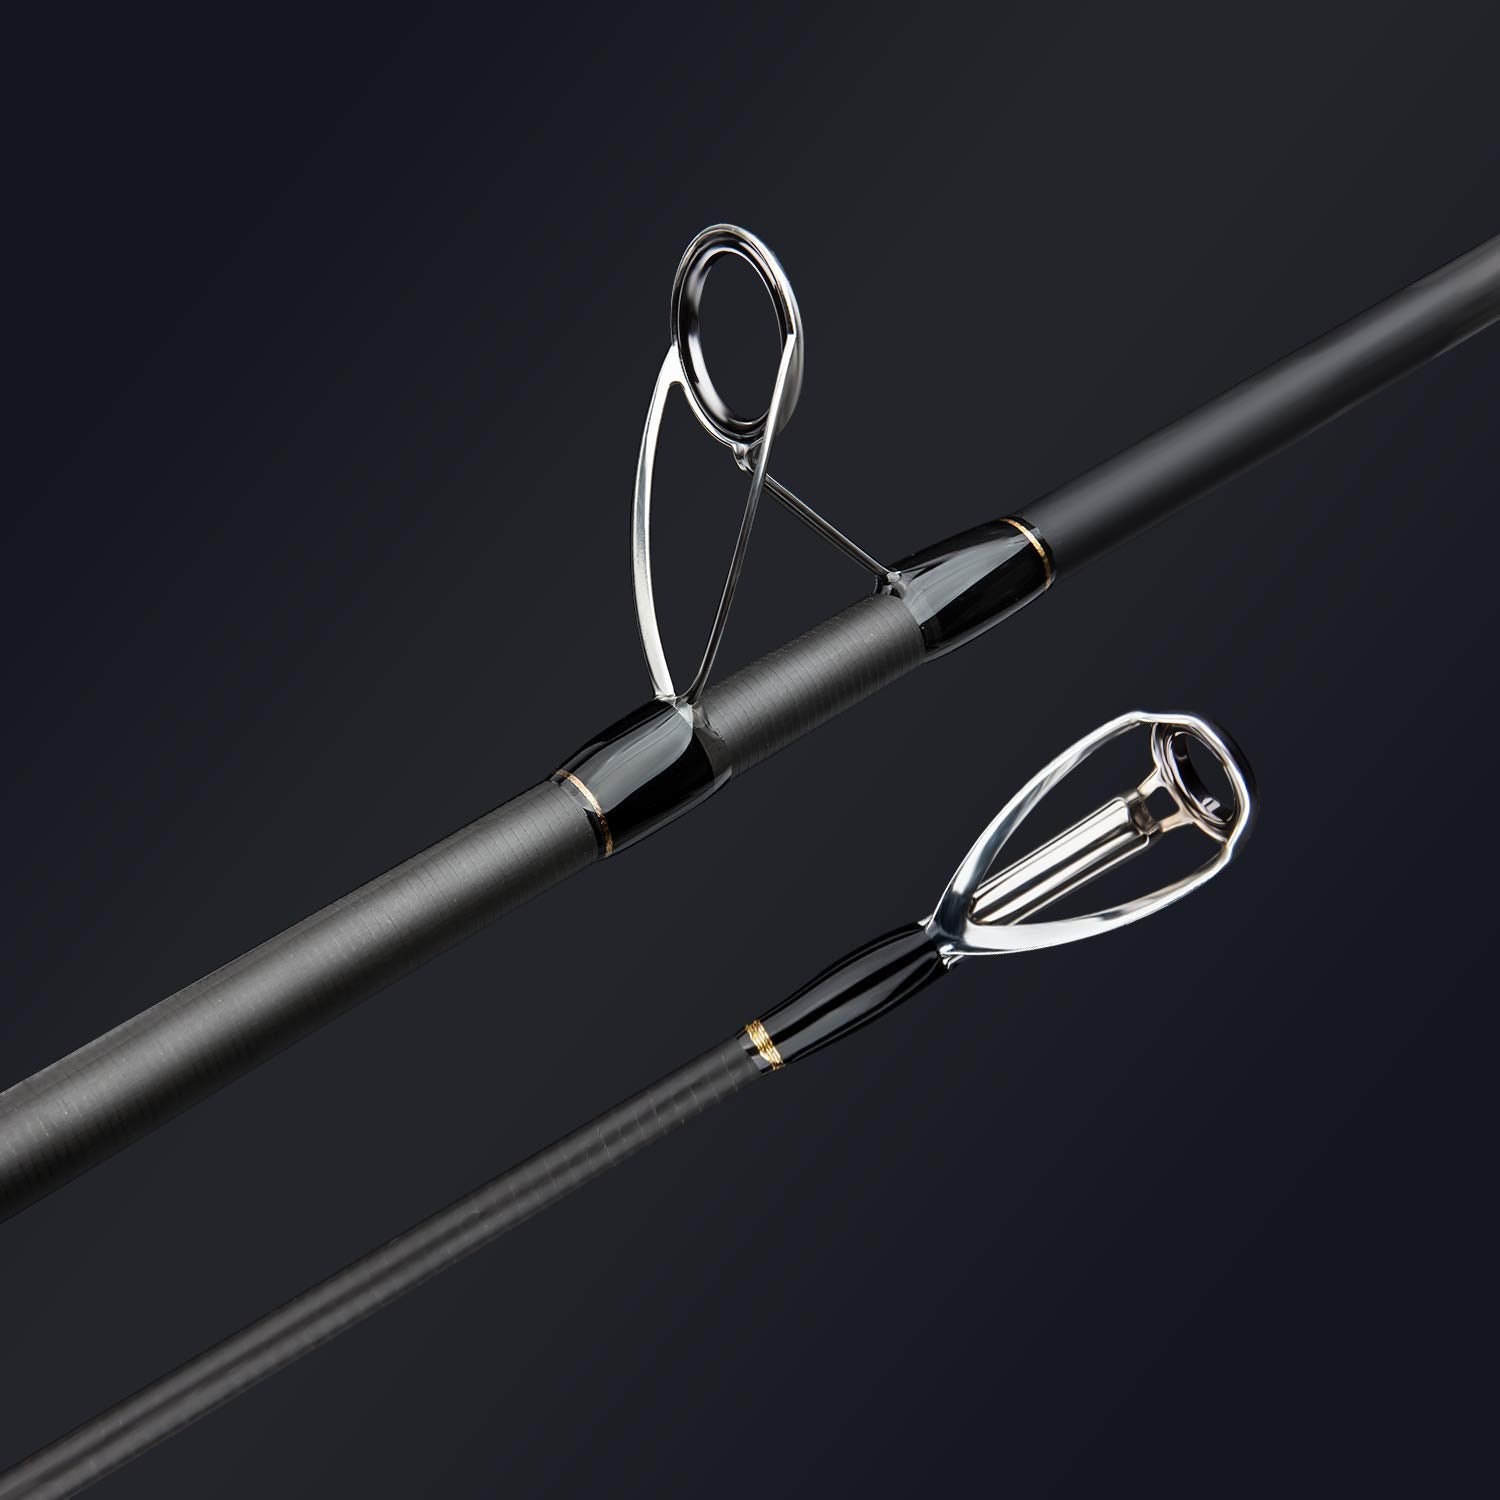 High-Performance Surf Fishing Graphite Spinning Rod - Top Quality